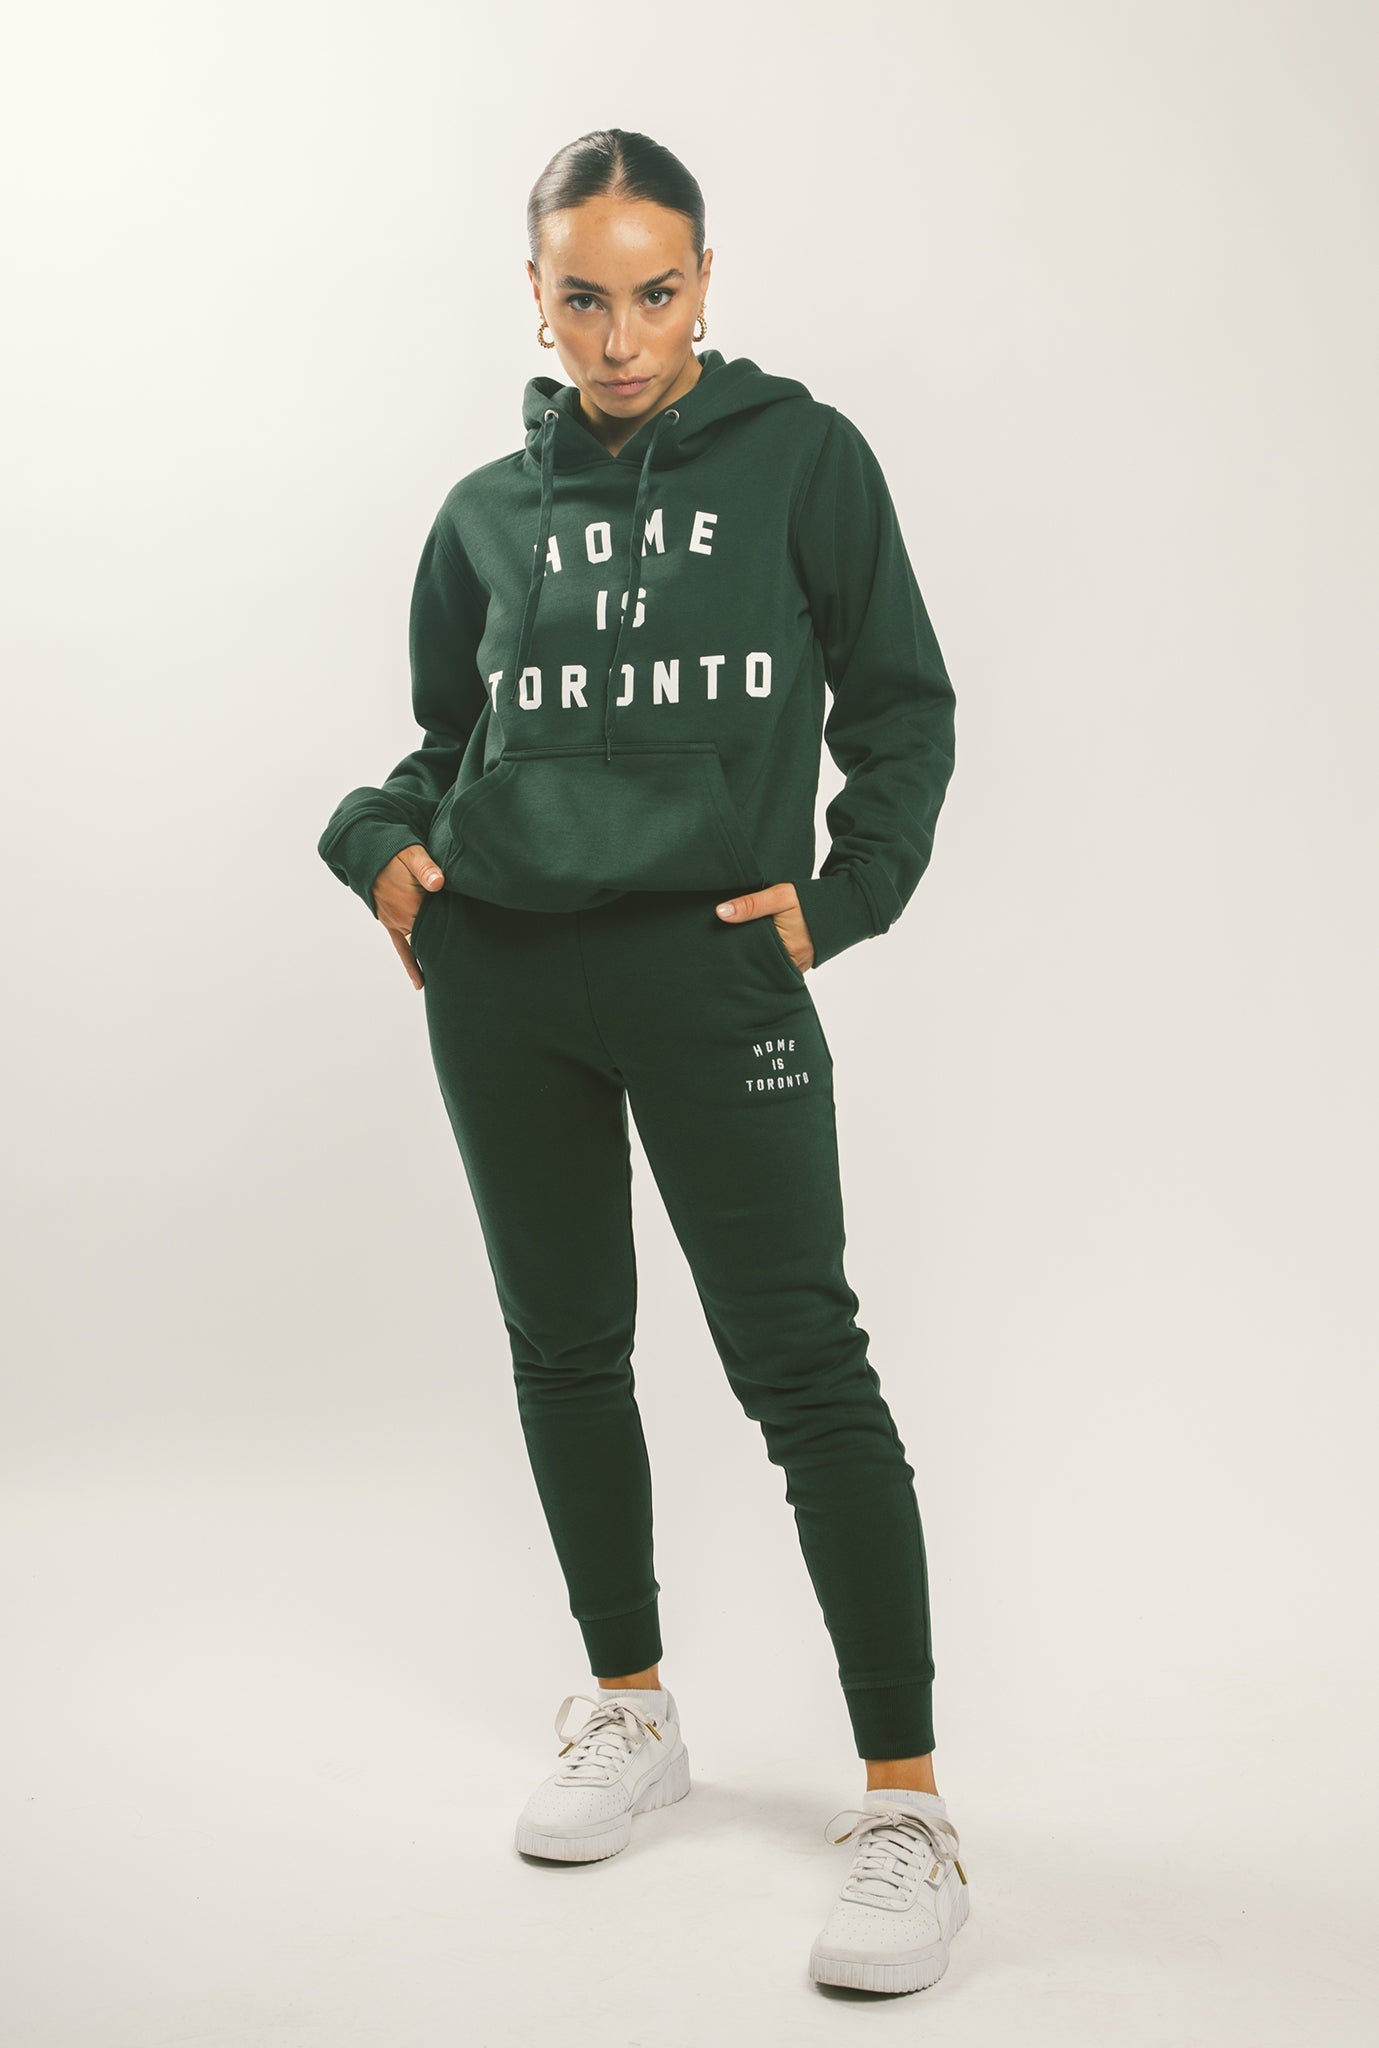 Home is Toronto Jogger - Forest Green